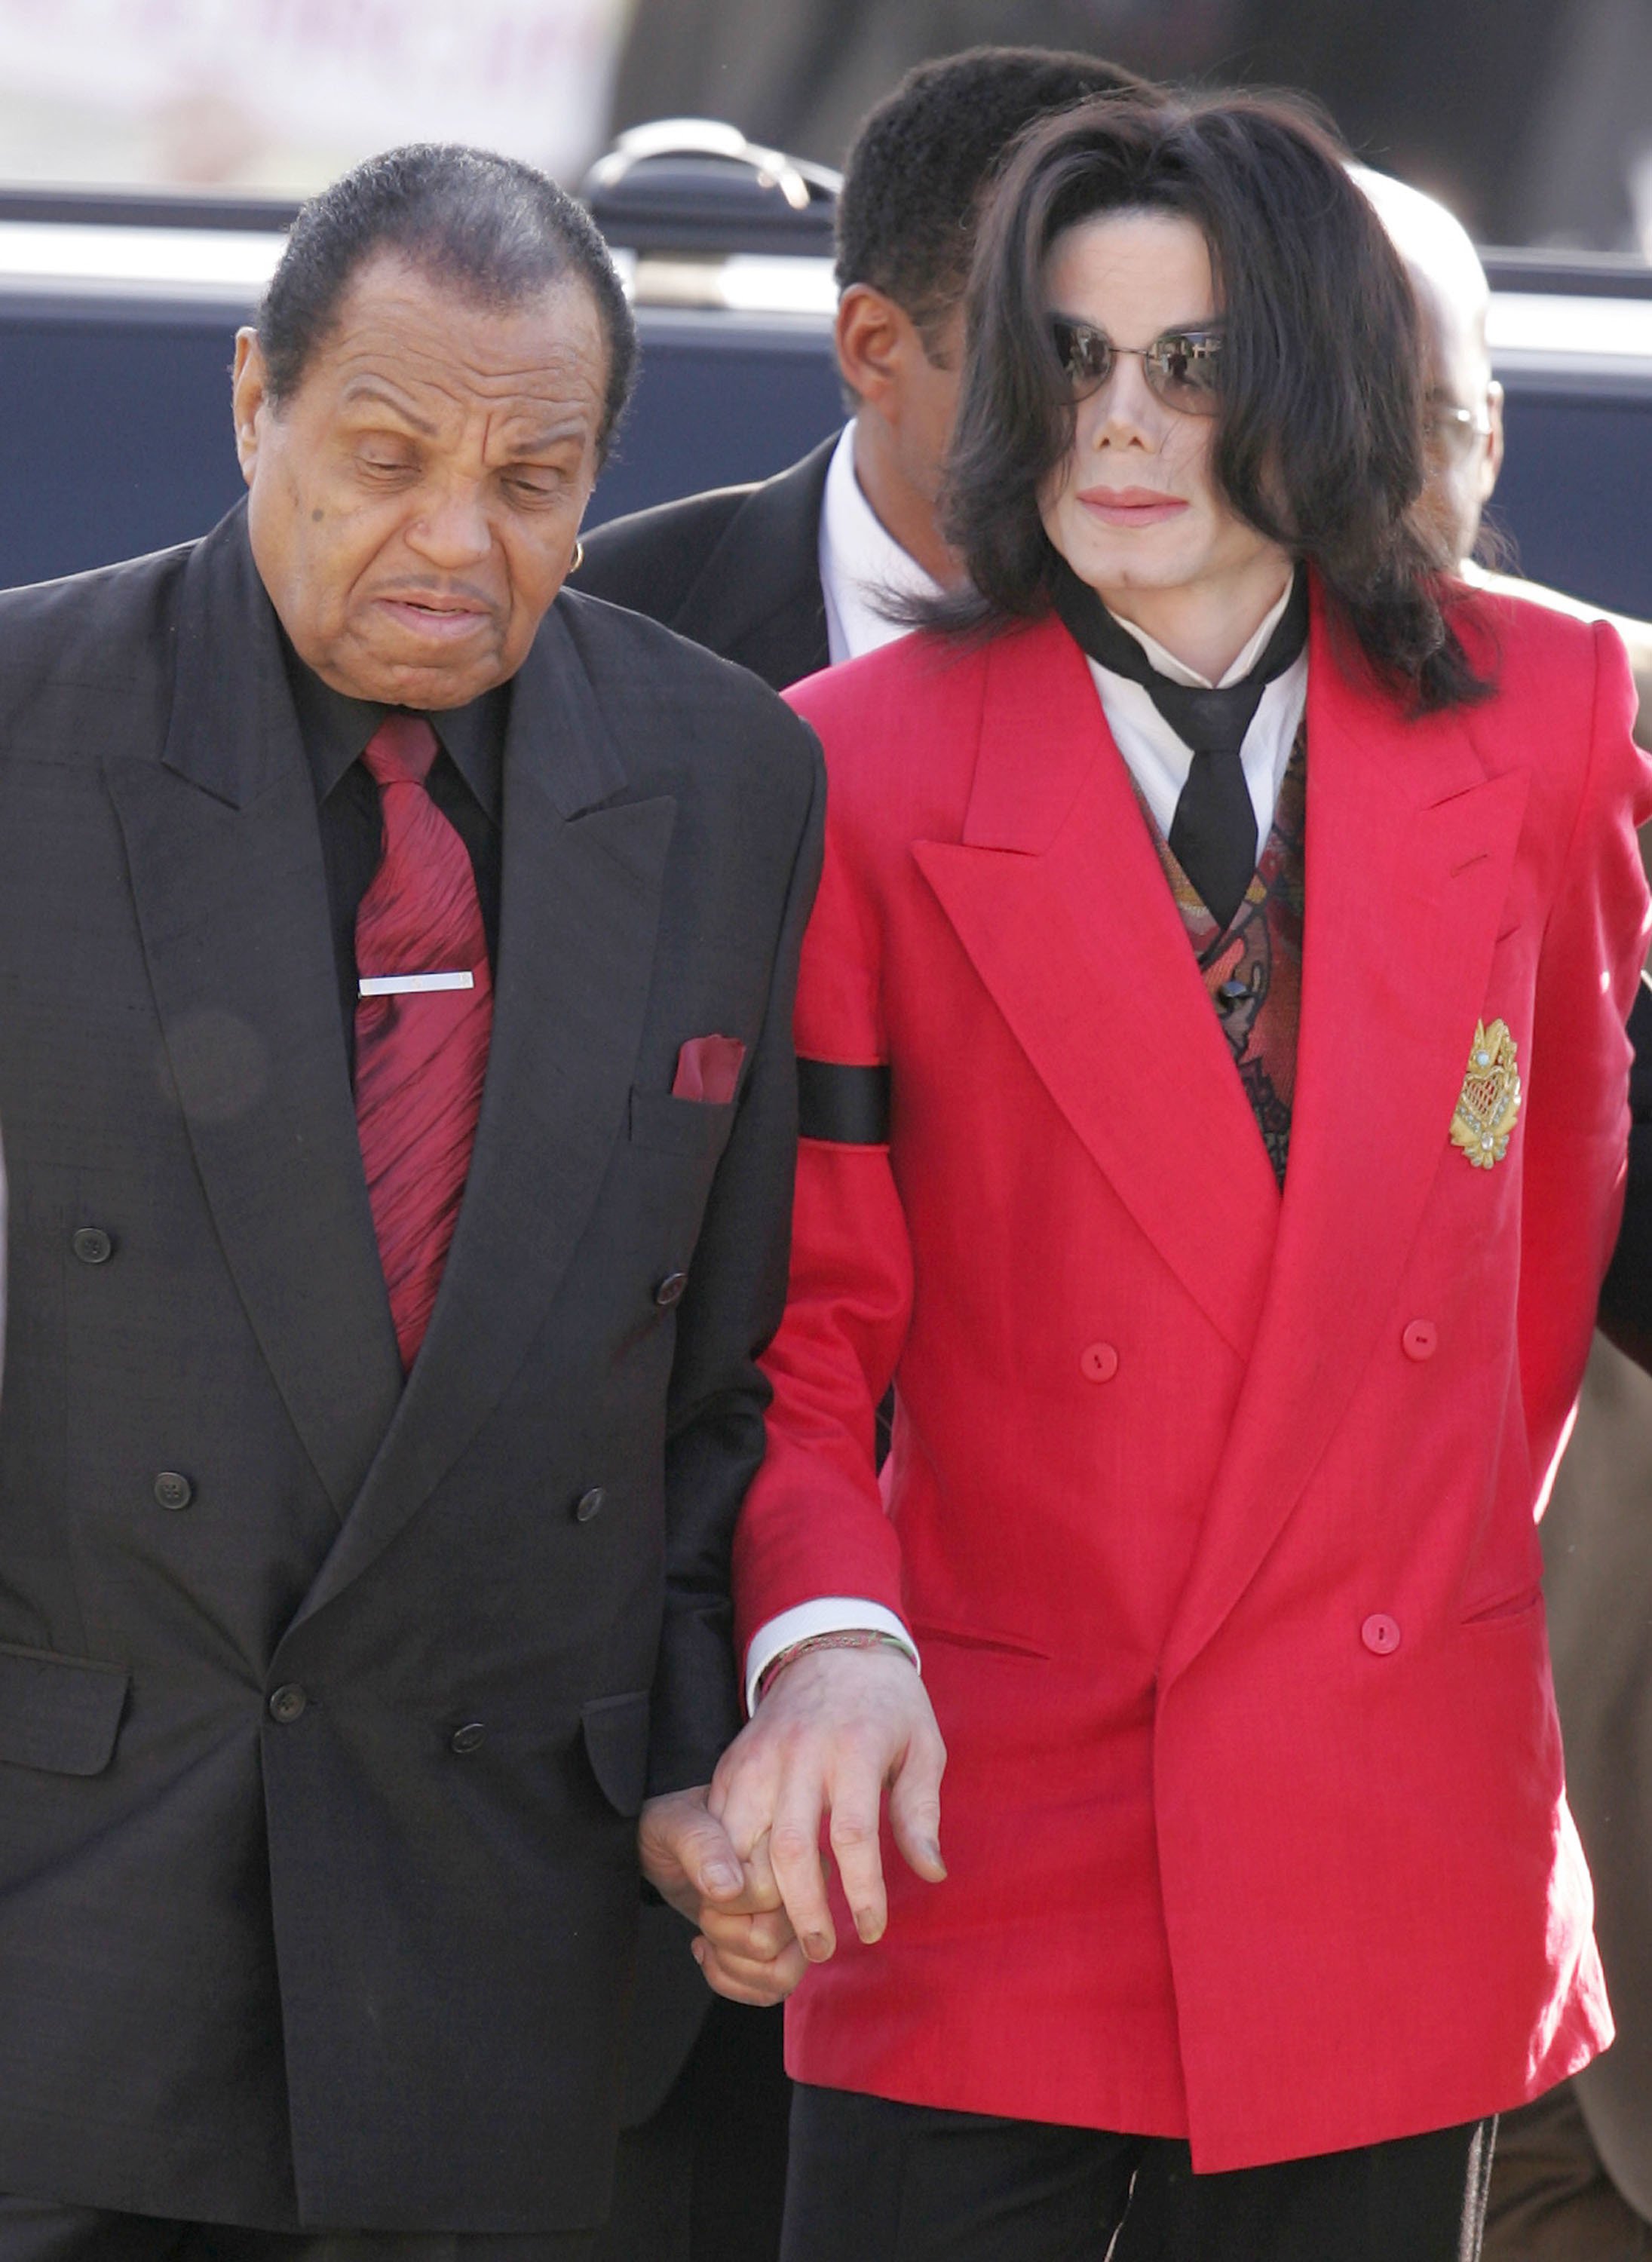 Joseph Jackson with son Michael Jackson at the Santa Barbara County Courthouse during the 2005 child molestation trial | Source: Getty Images